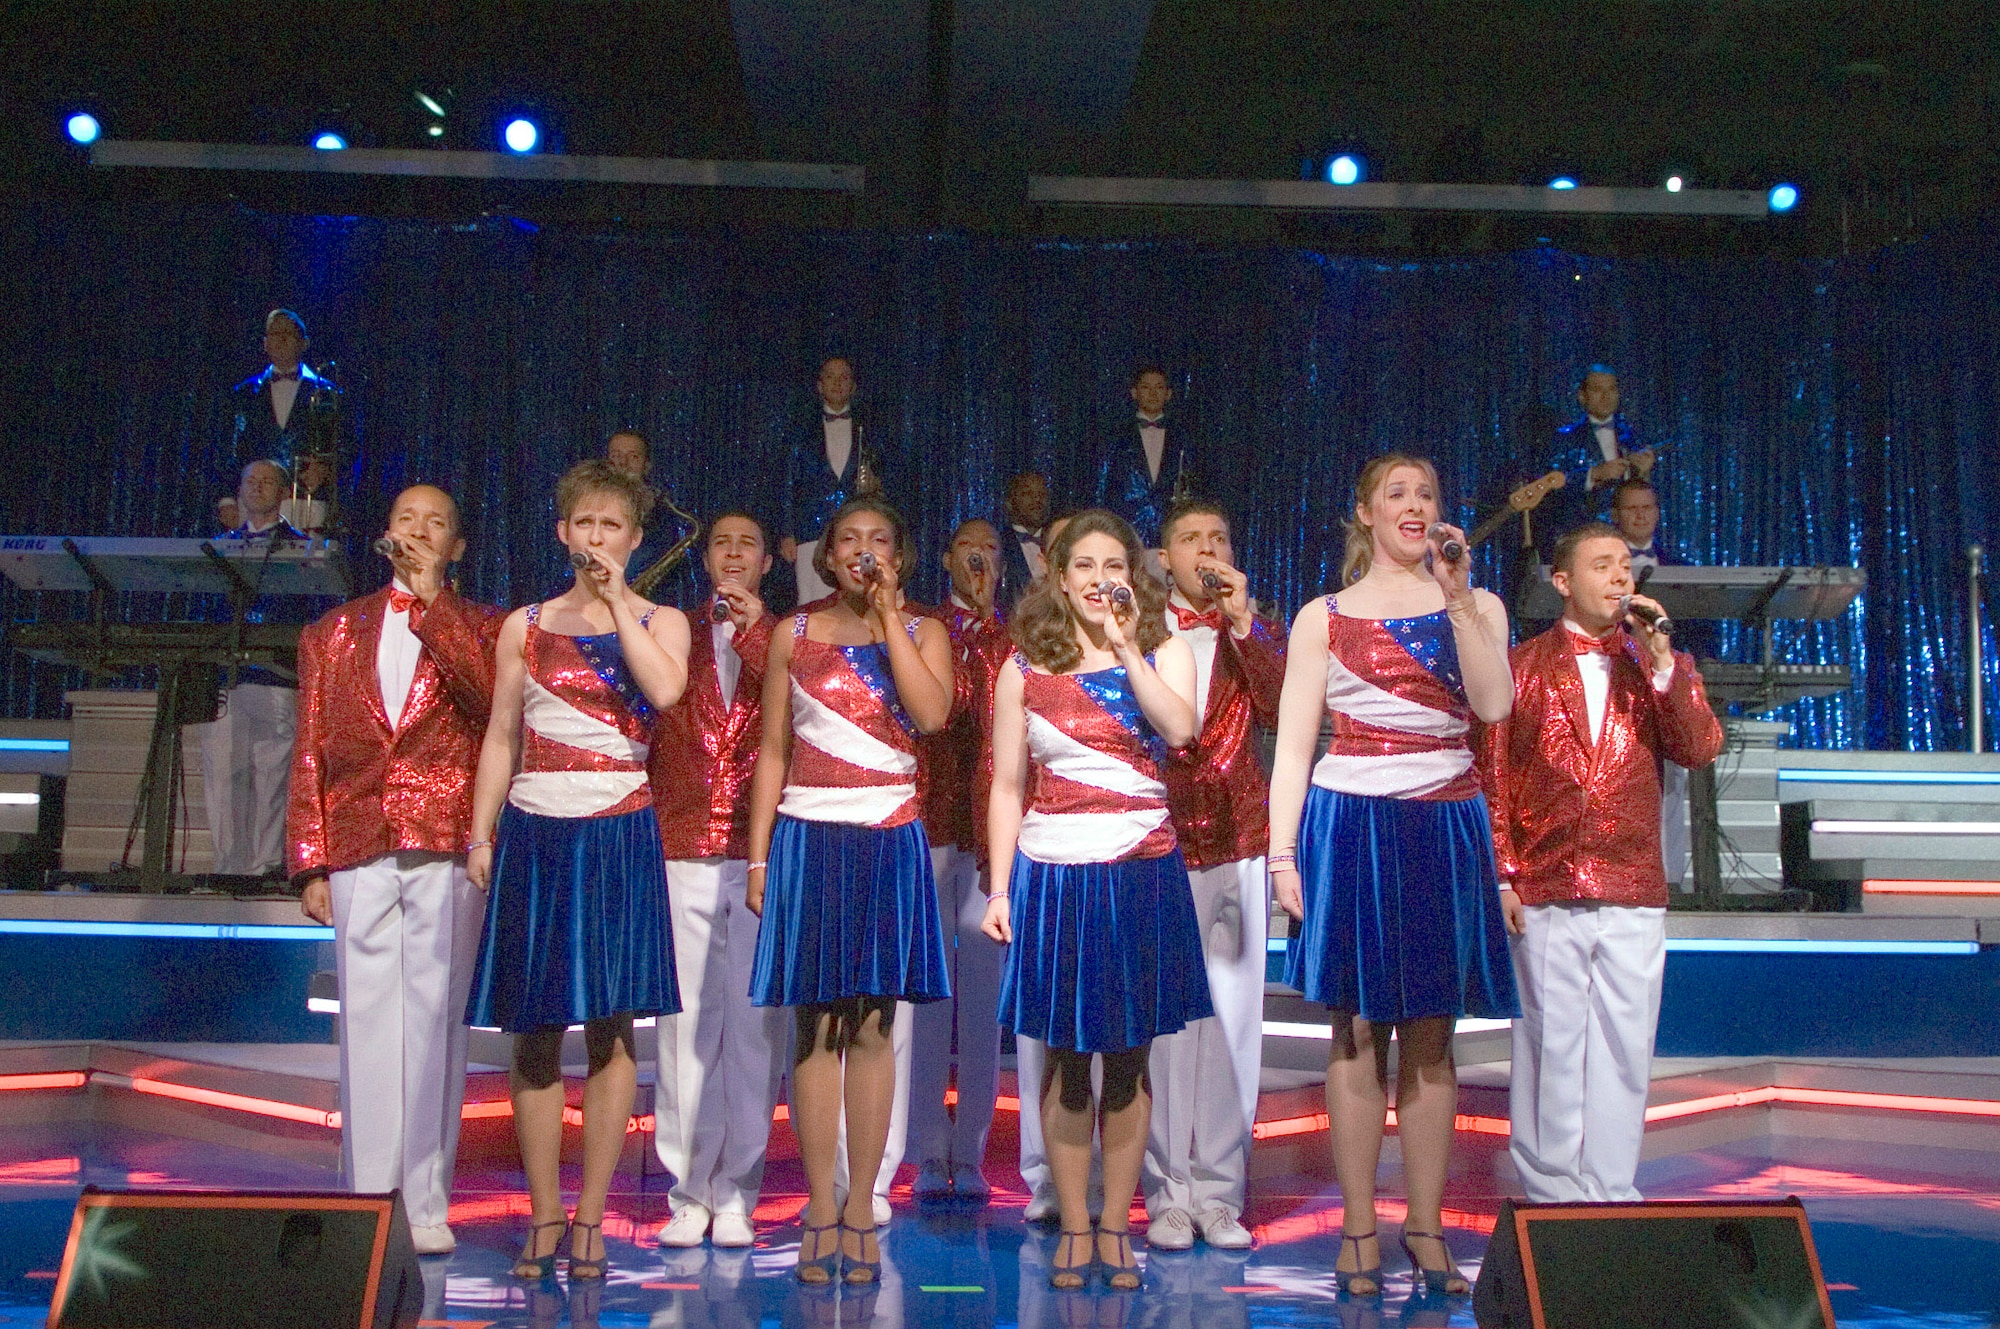 The 2007 Tops in Blue team perform their show for the Tops in Blue Worldwide Talent contestants in the collocated club on Lackland Air Force Base, Texas, Dec. 10. The contestants are competing to be the new 2008 Tops in Blue performers. (U.S. Air Force photo/Tech. Sgt. Cecilio Ricardo) 